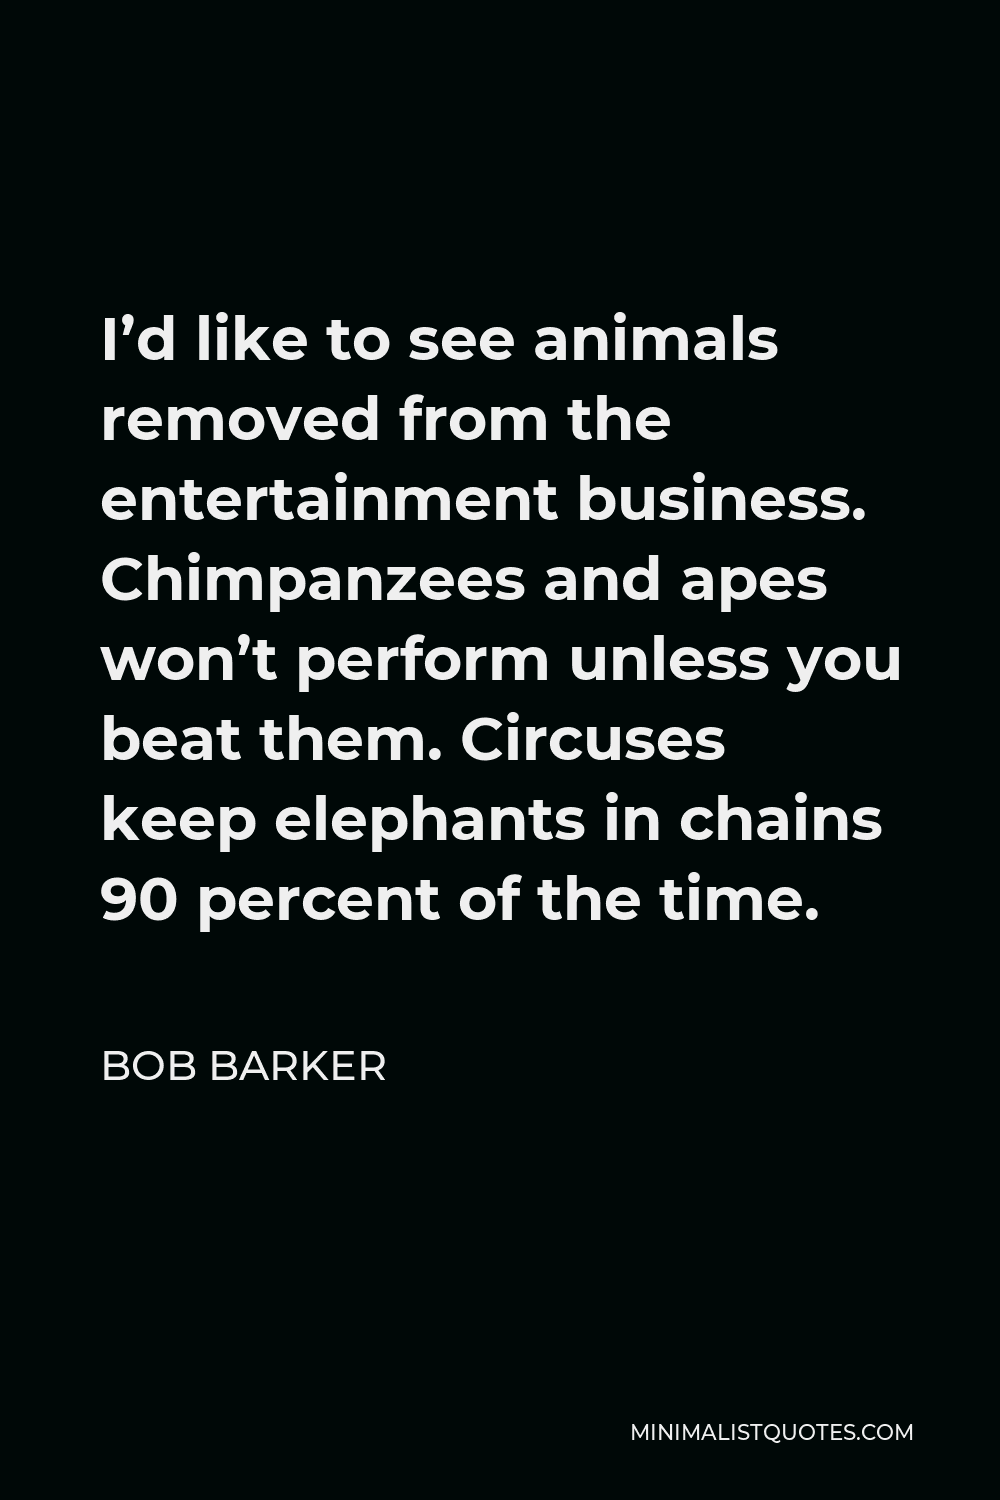 Bob Barker Quote - I’d like to see animals removed from the entertainment business. Chimpanzees and apes won’t perform unless you beat them. Circuses keep elephants in chains 90 percent of the time.